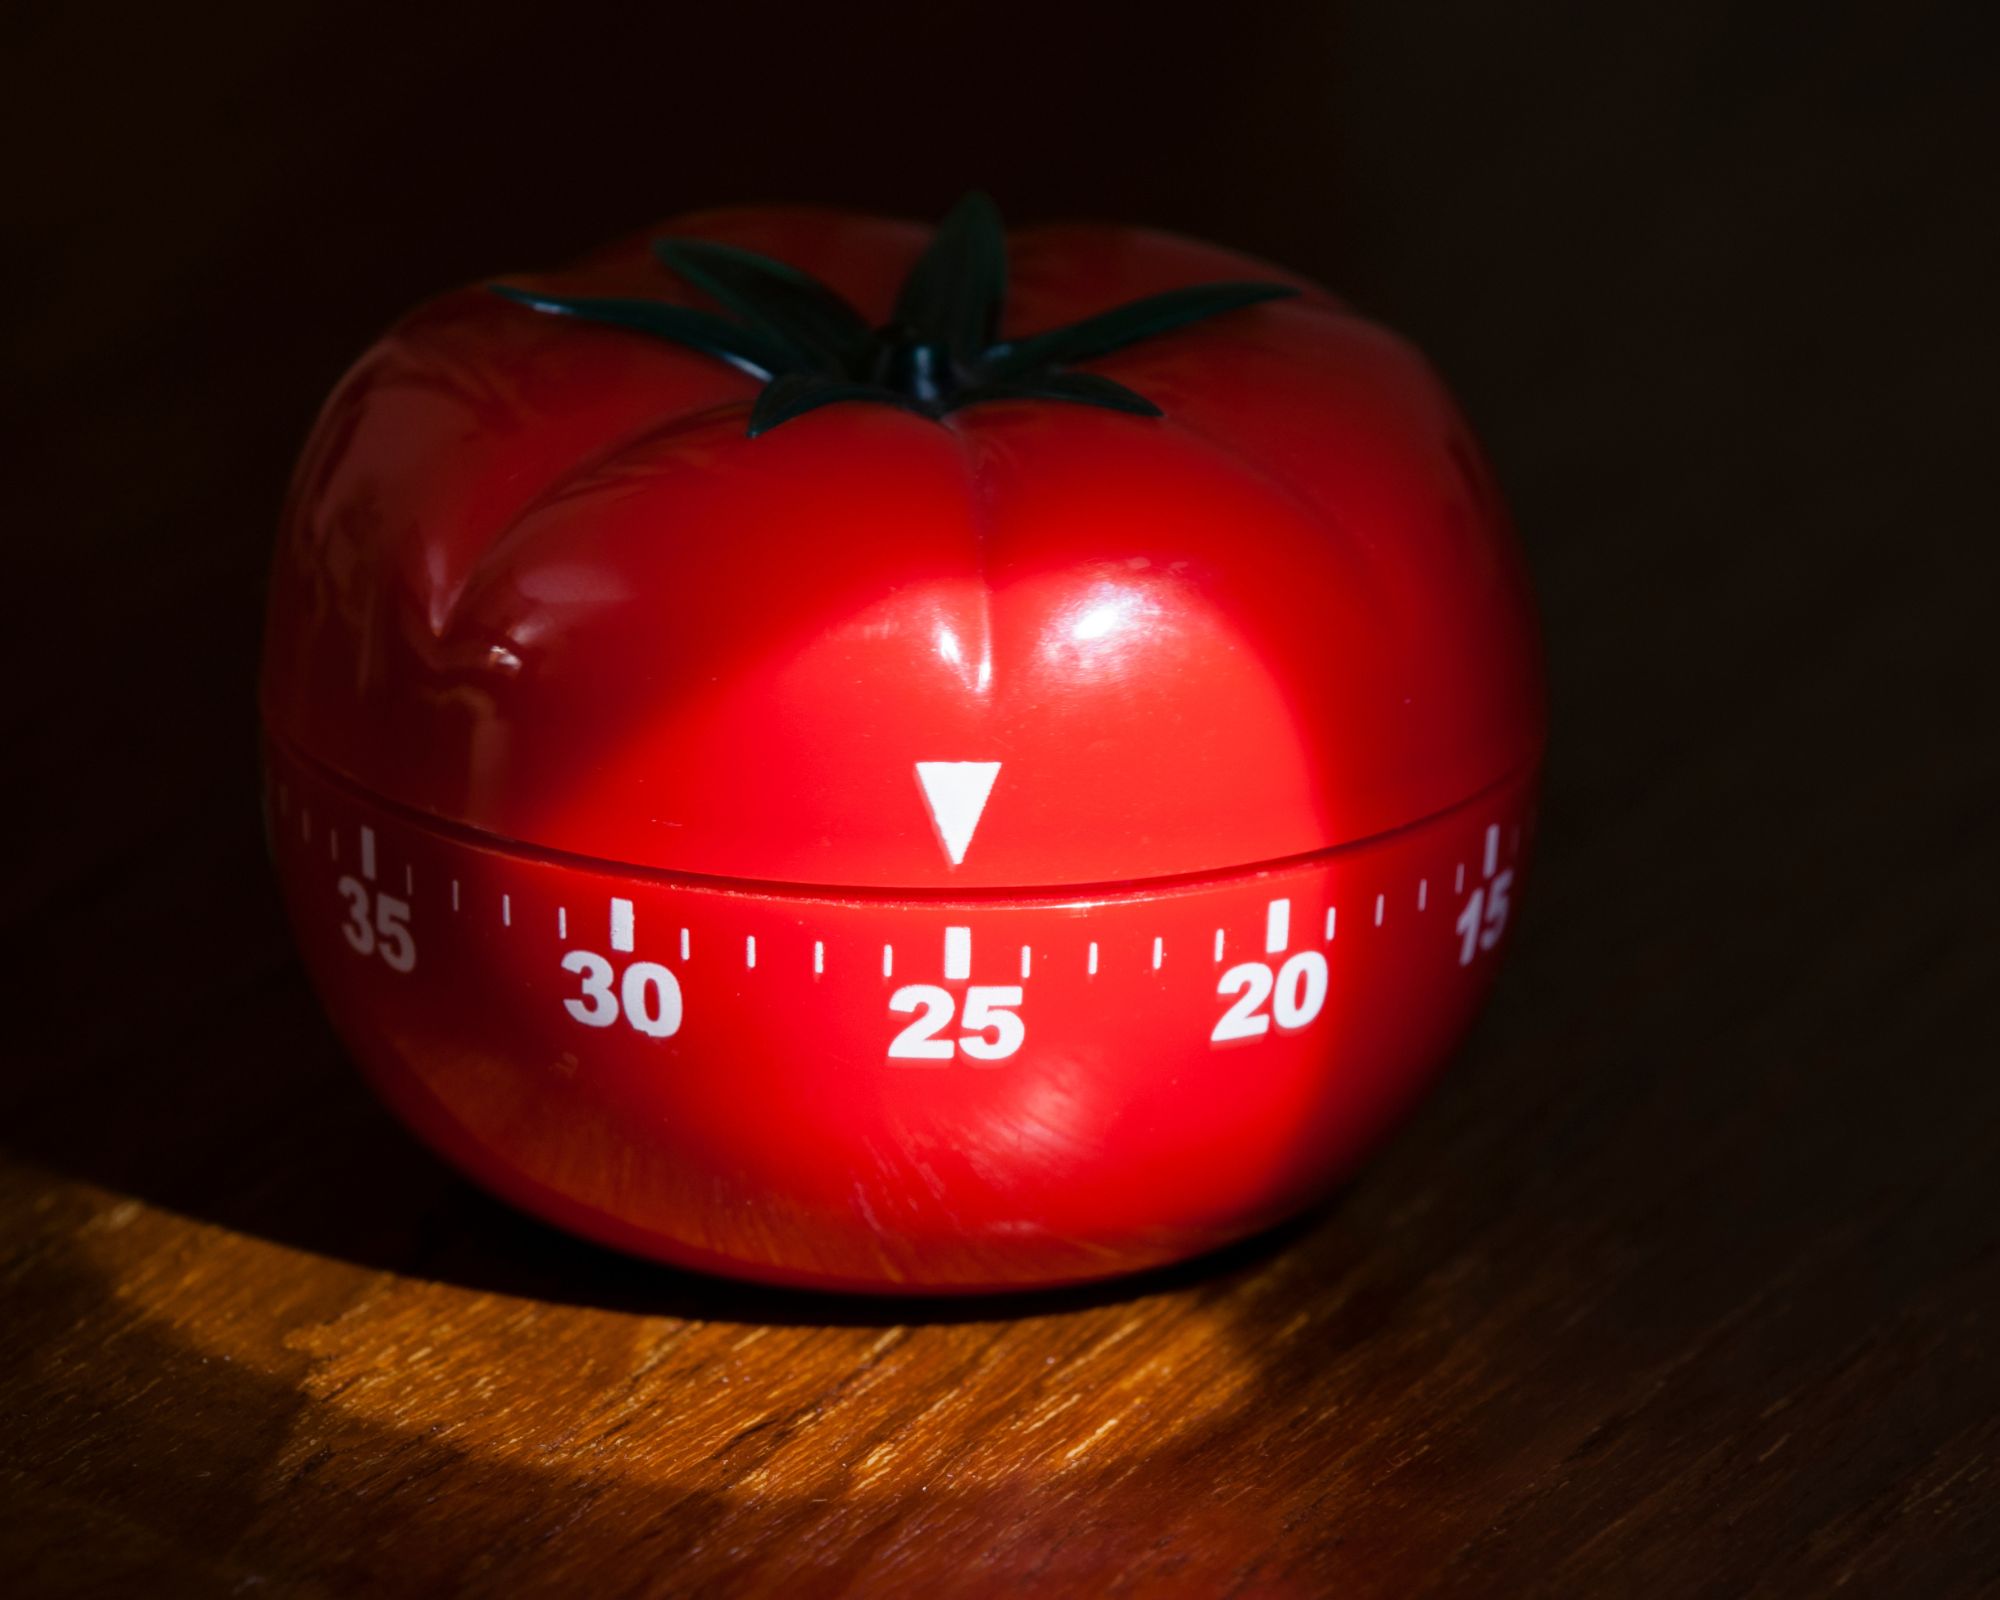 Is being too busy just an excuse? The Pomodoro technique is a great way to stay focused when working on one task.